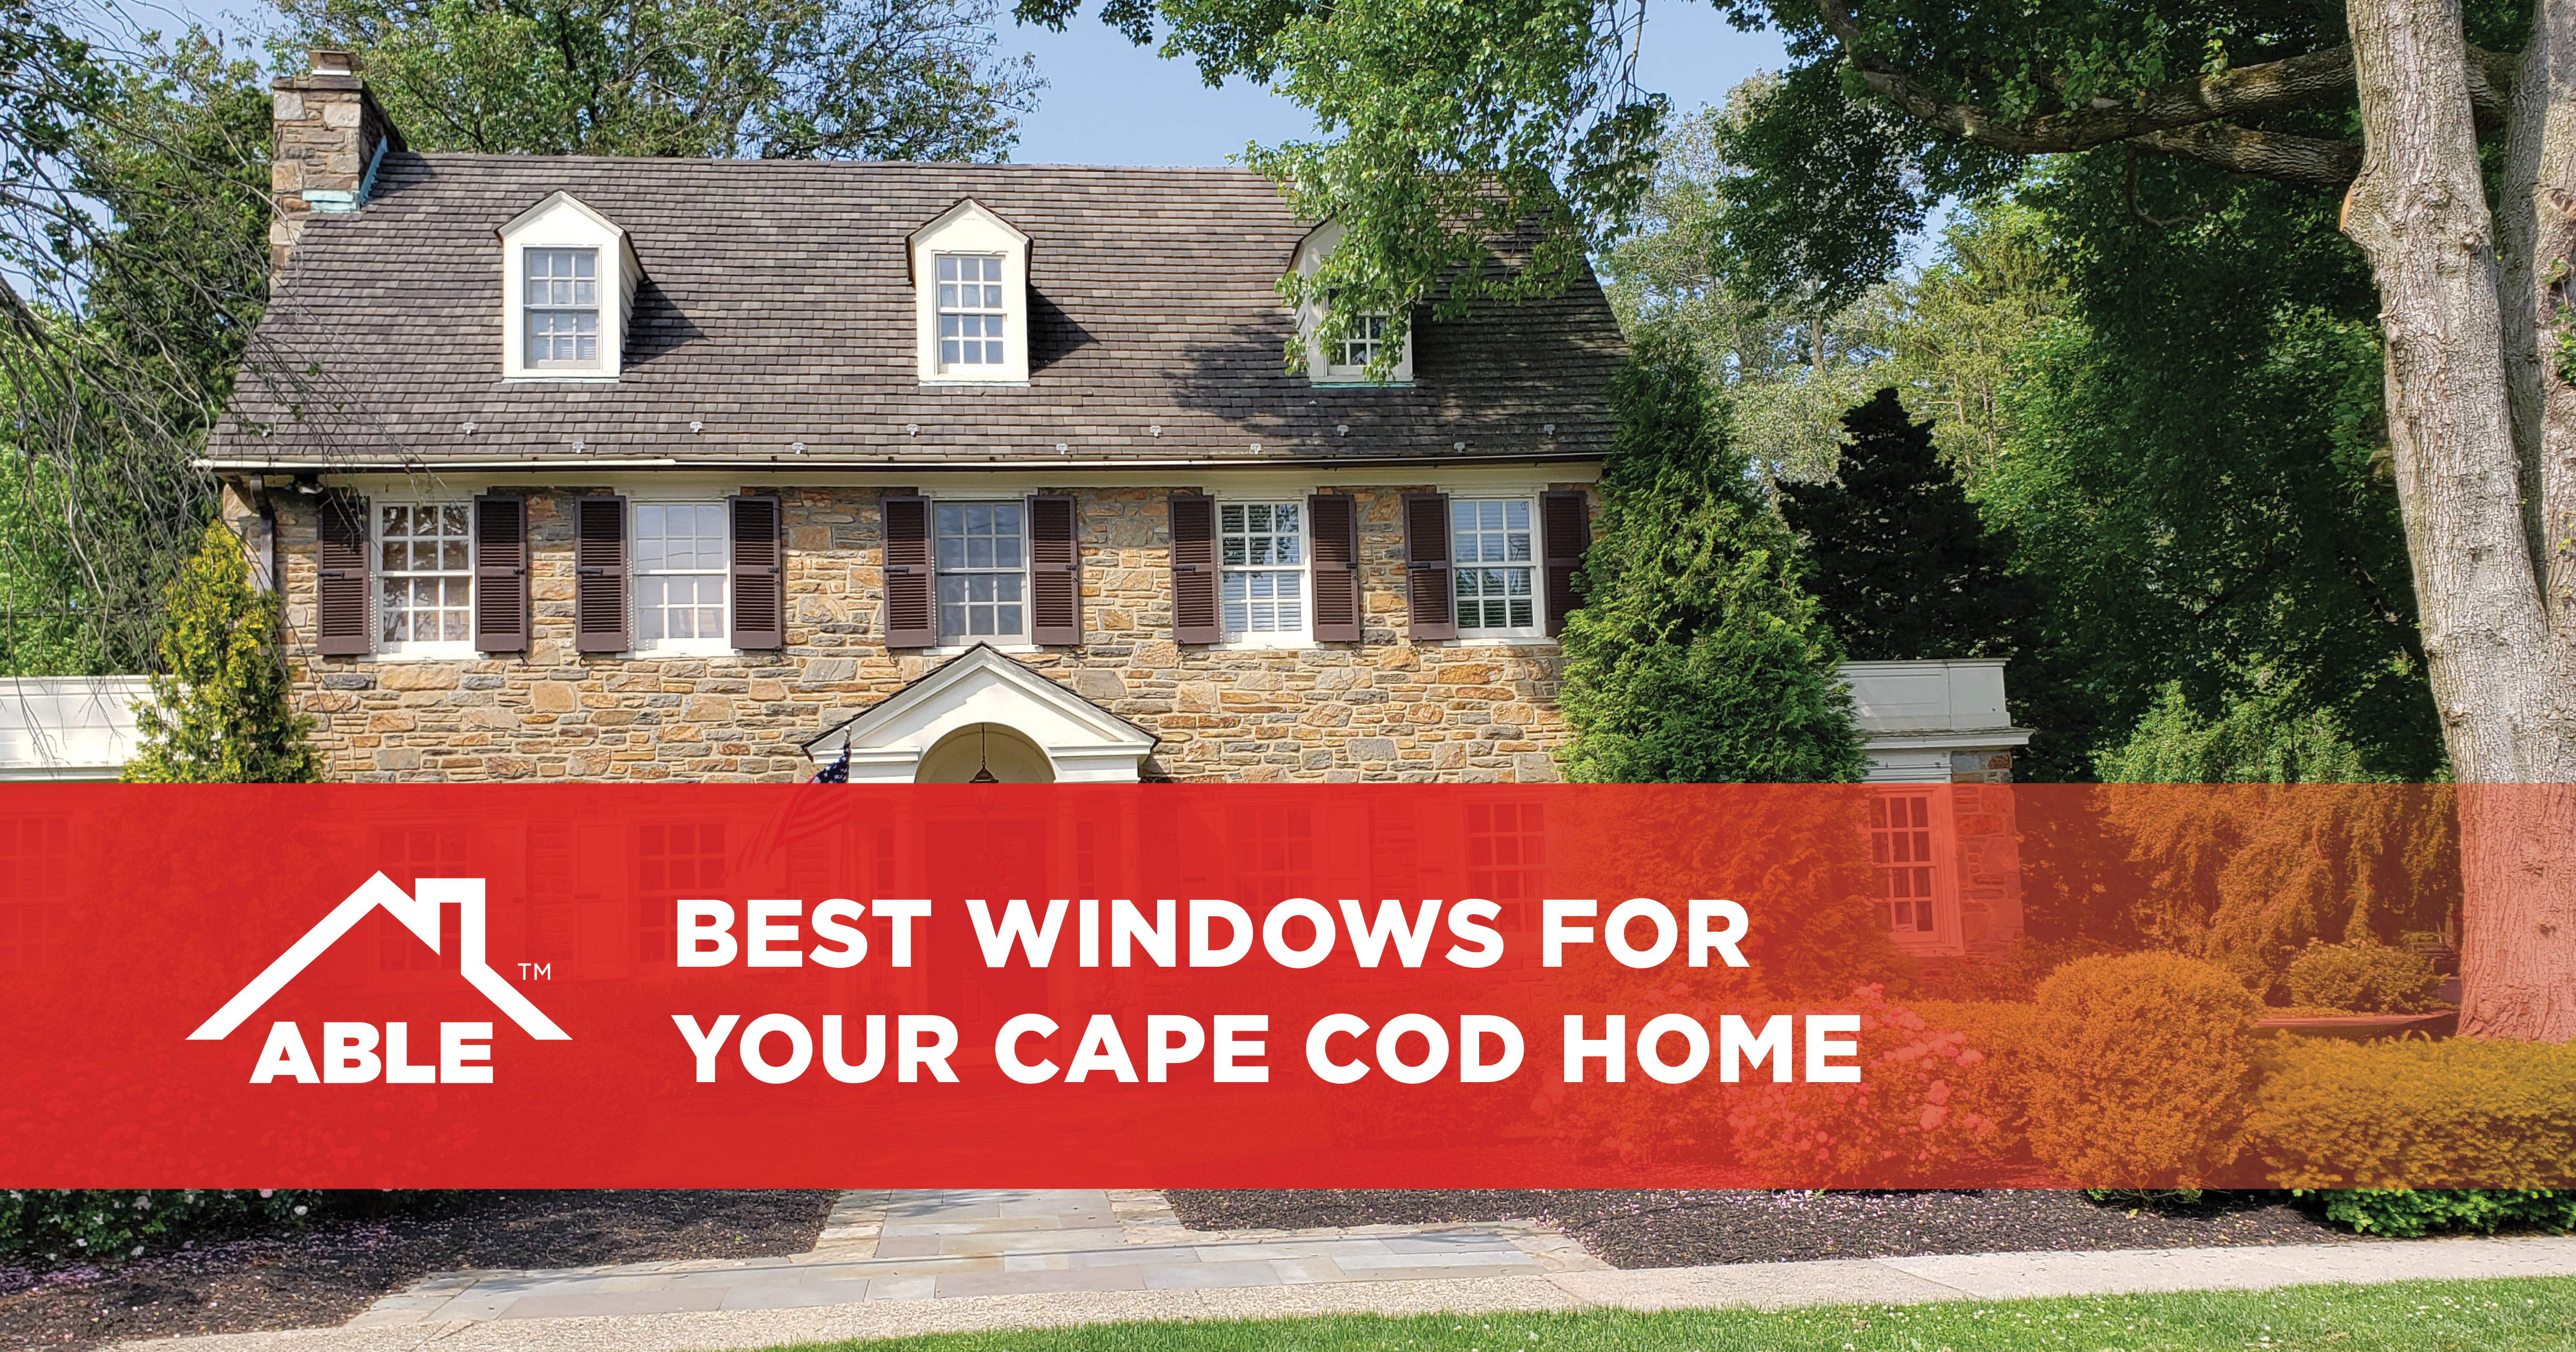 Best windows for your cape cod home